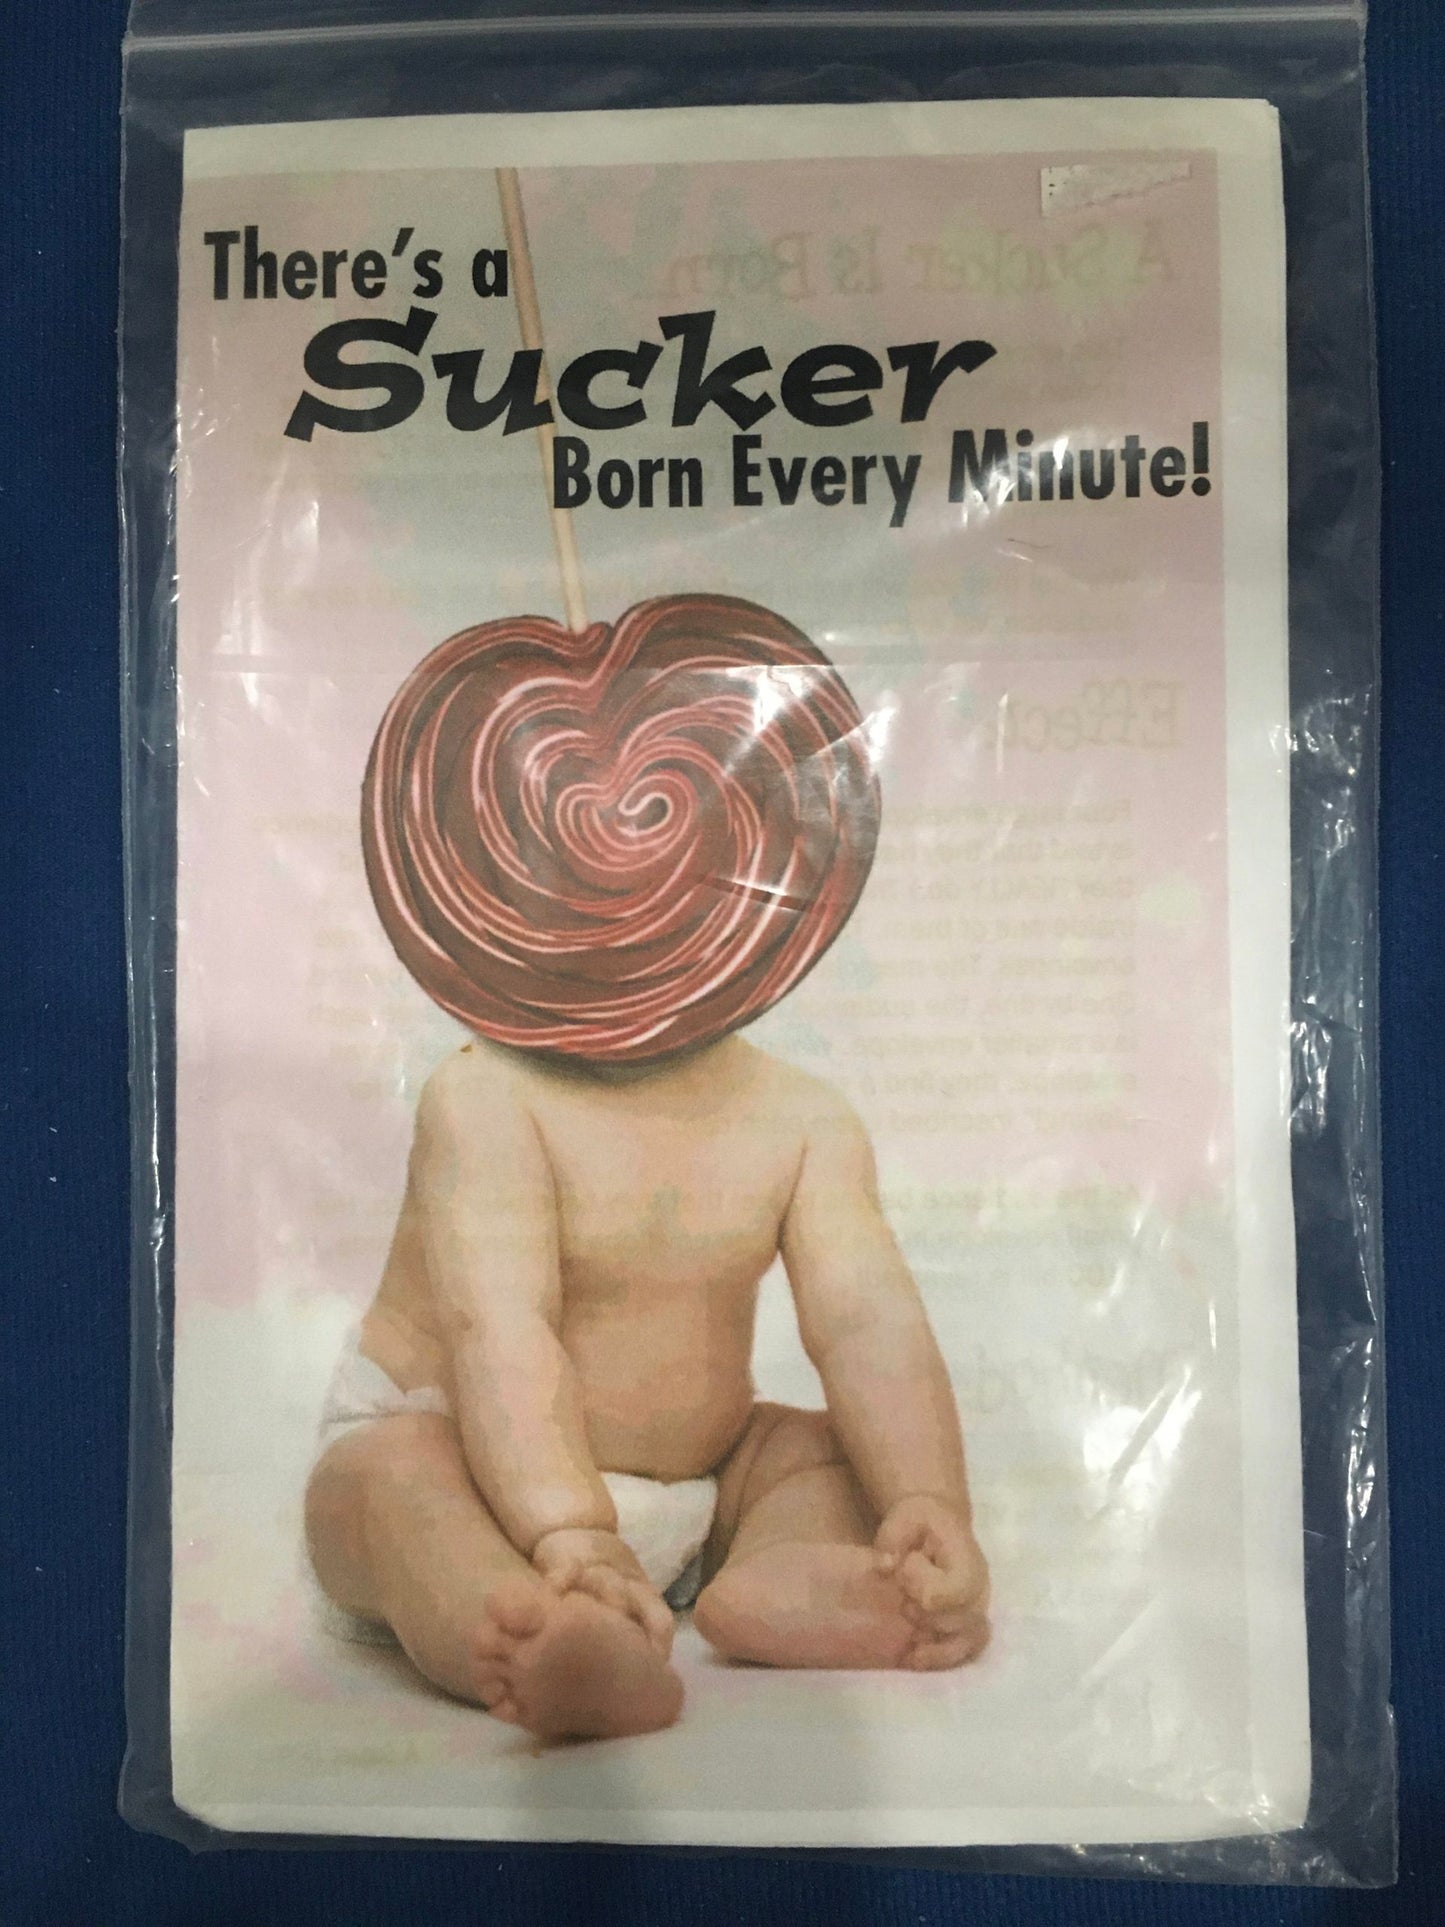 There's a Sucker Born Every Minute, used